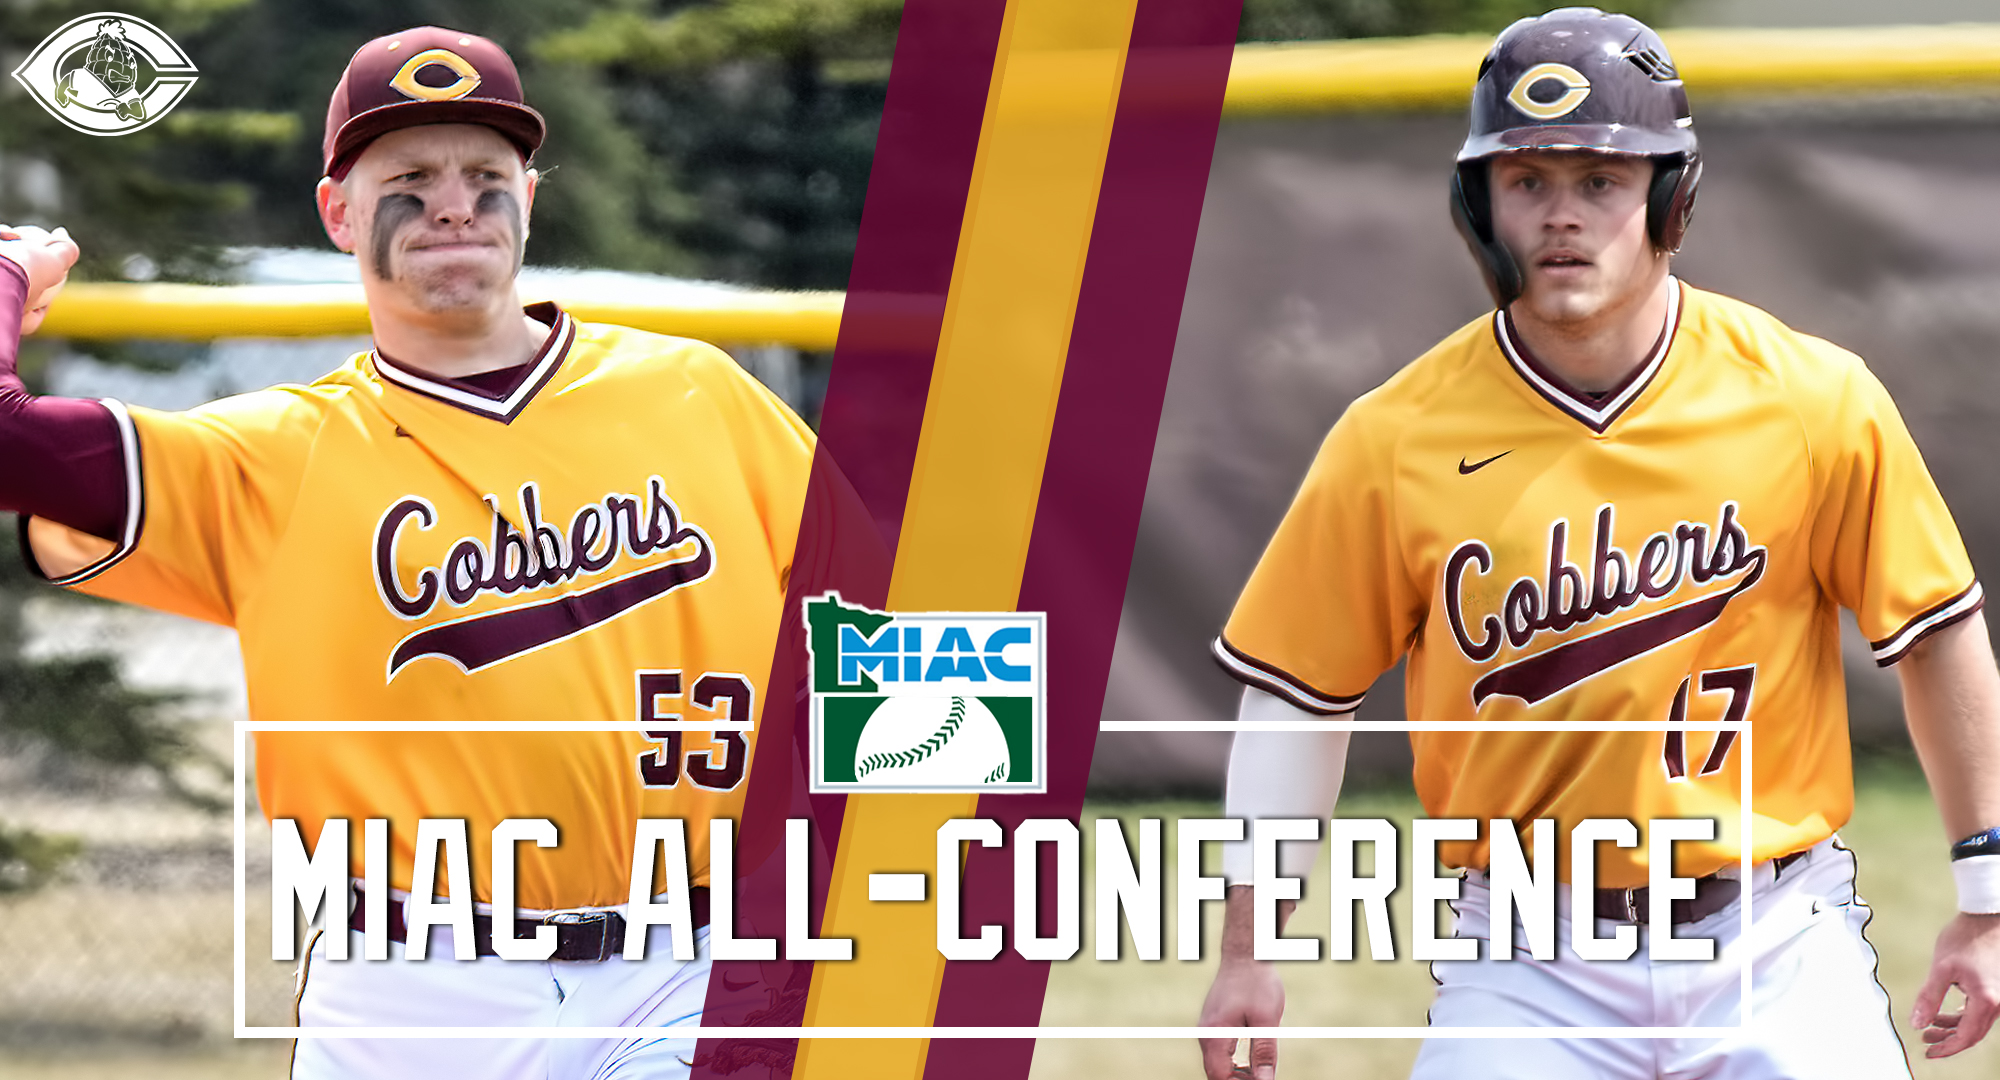 Isaac Henkemyer-Howe (L) and Andy Gravdahl both  multiple MIAC postseason honors, and Henkemyer-Howe was named the MIAC Rookie of the Year.